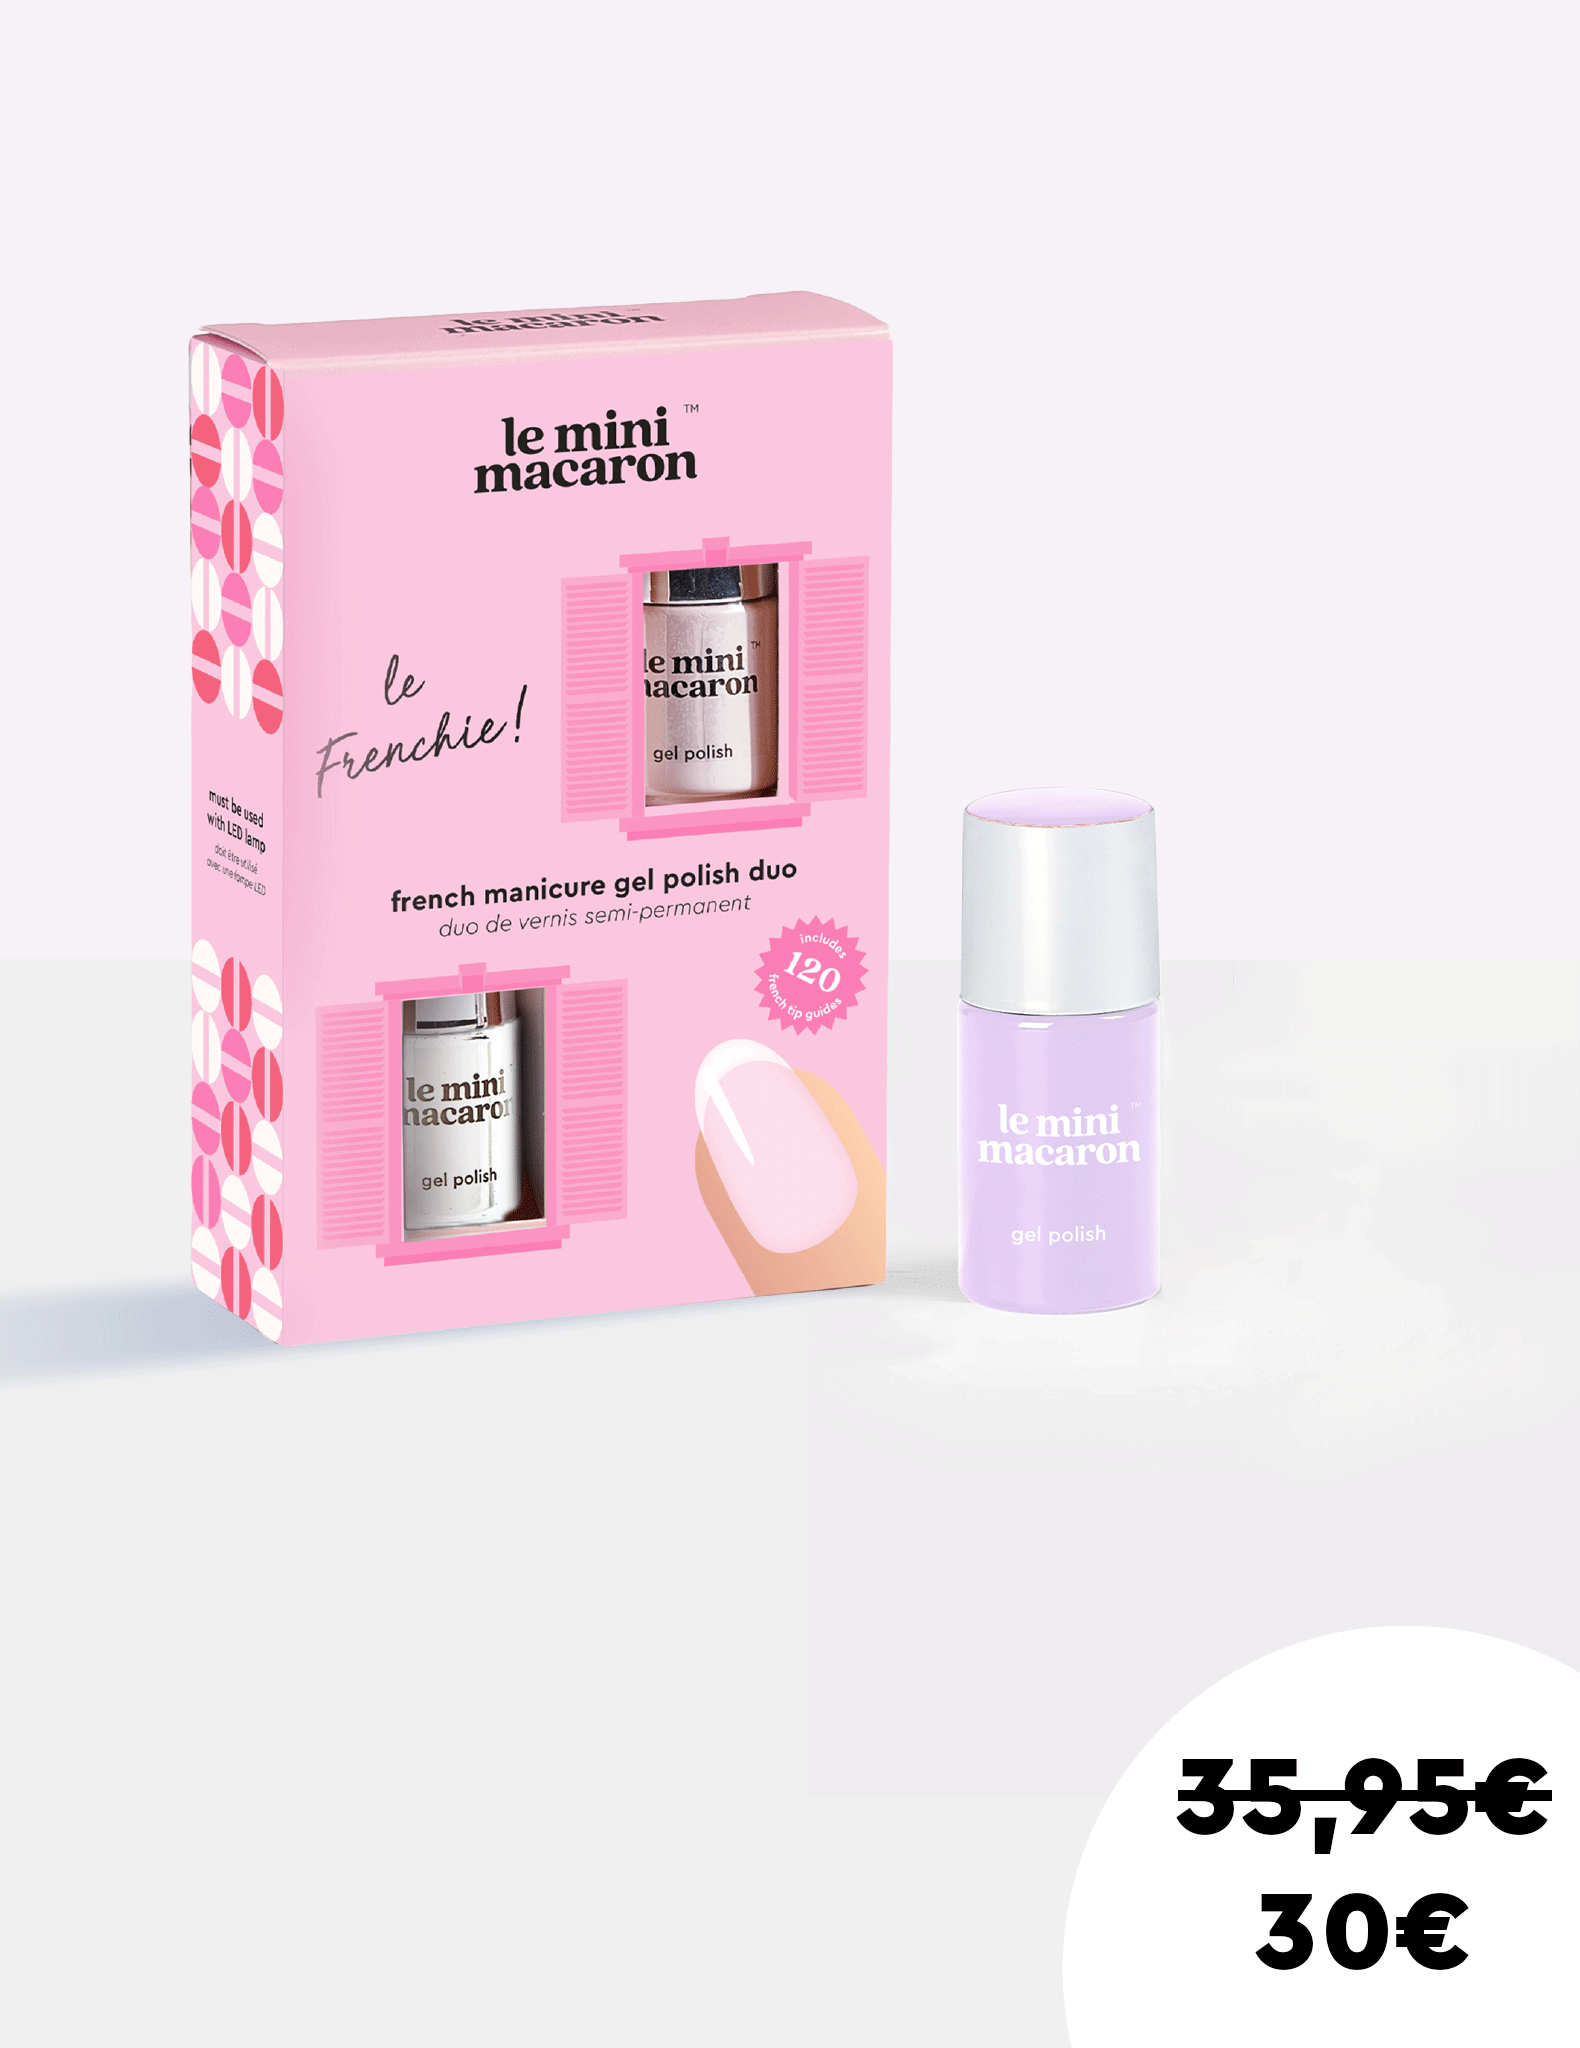 SAVE 5€ When Buying Le Frenchie+ 1 shade - Le Mini Macaron